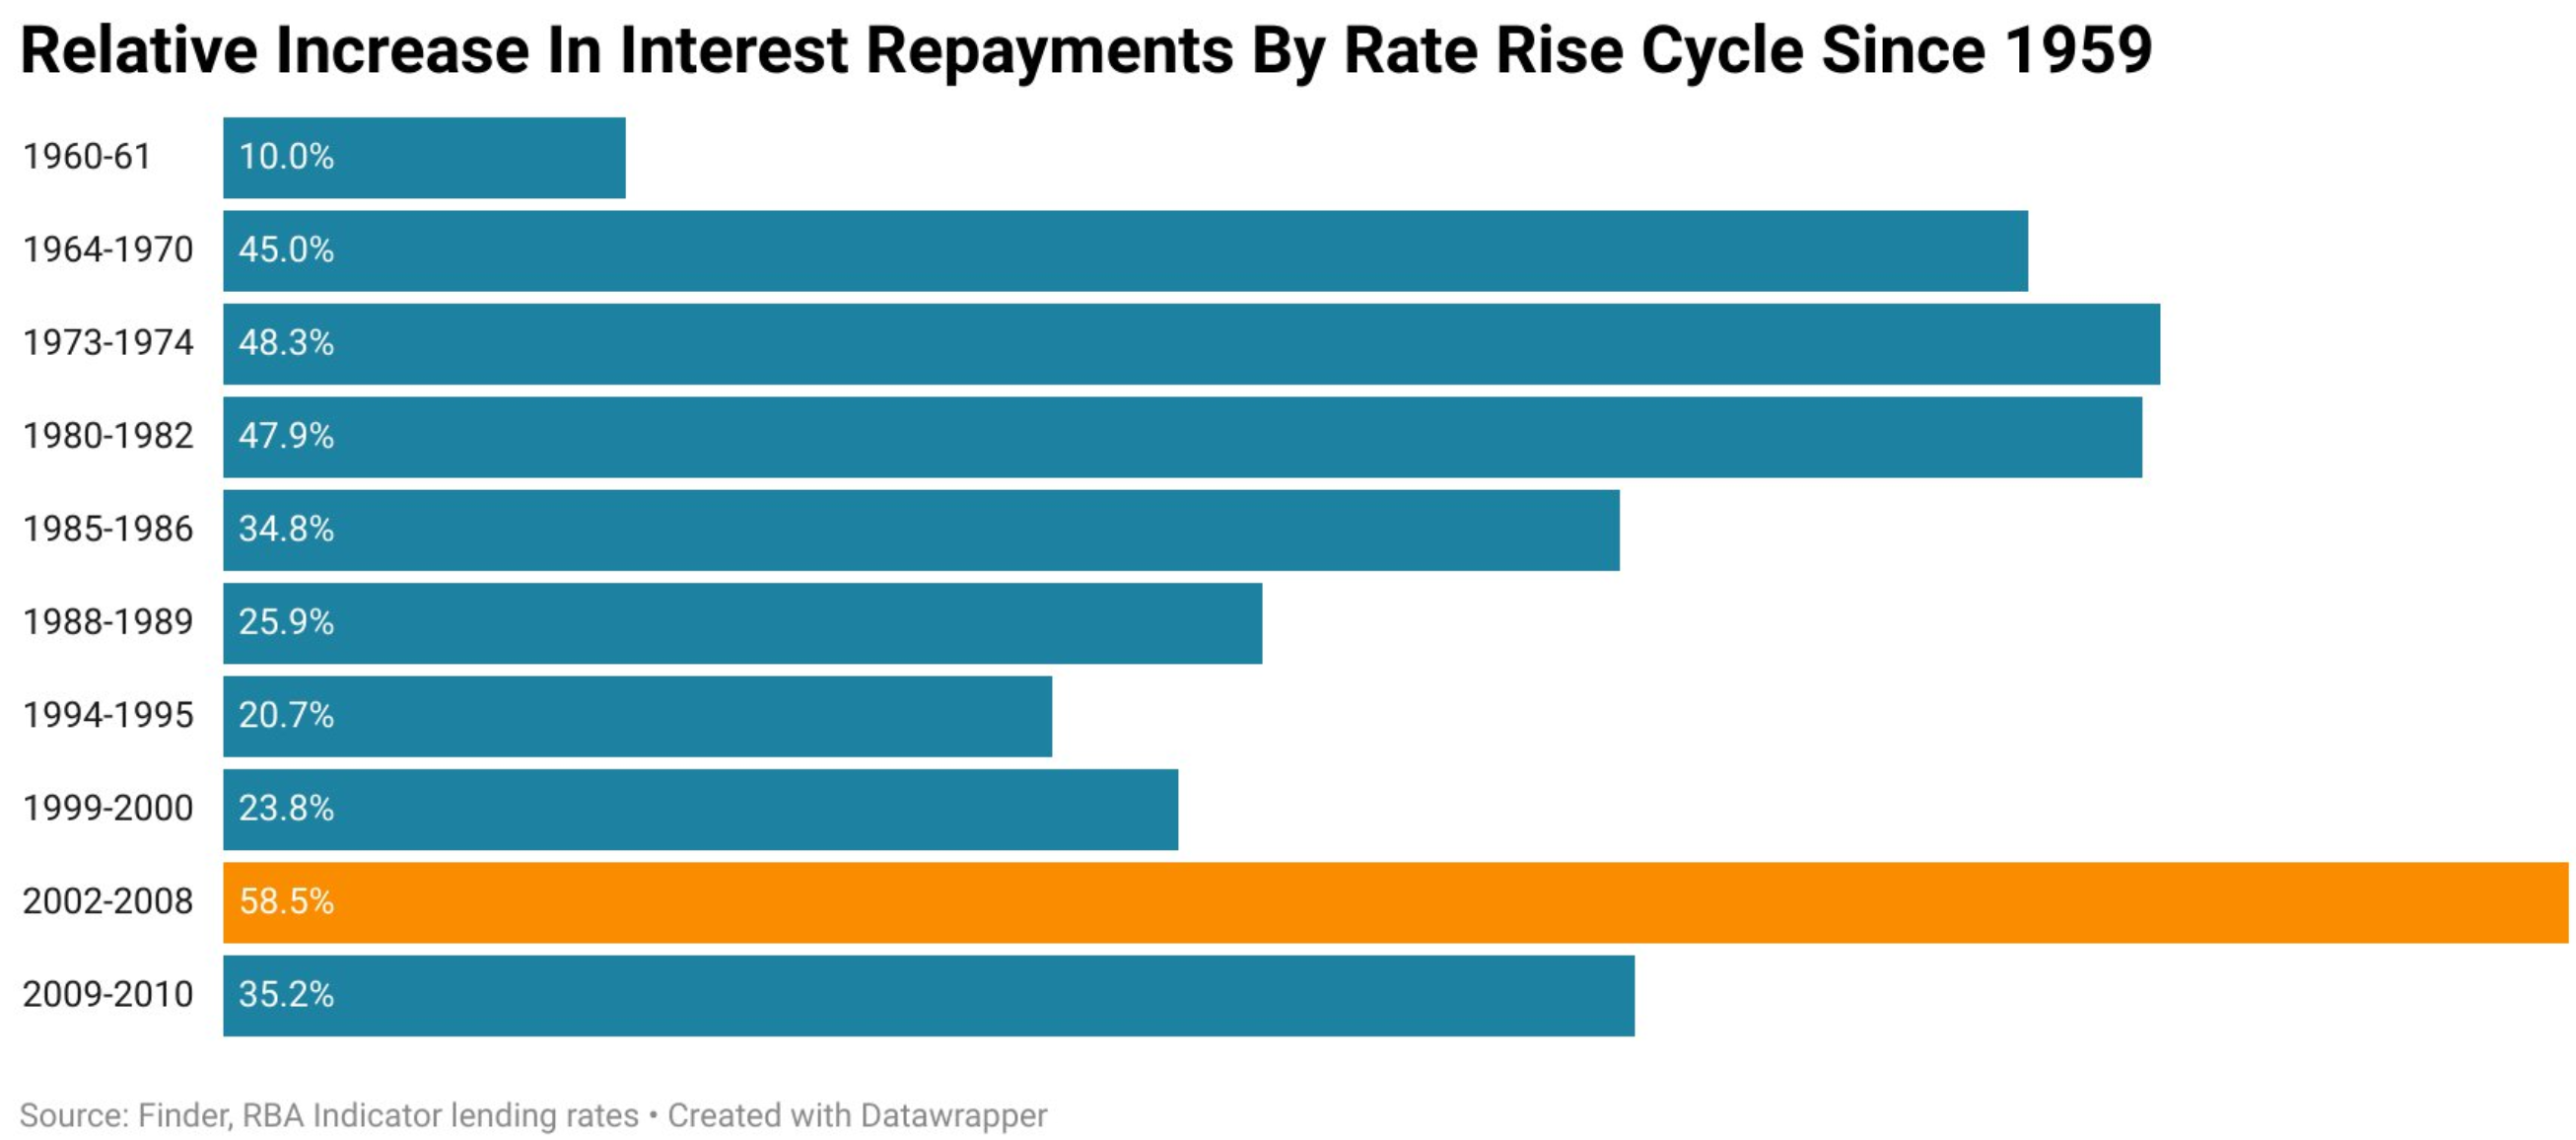 Comparisons of interest rate cycles